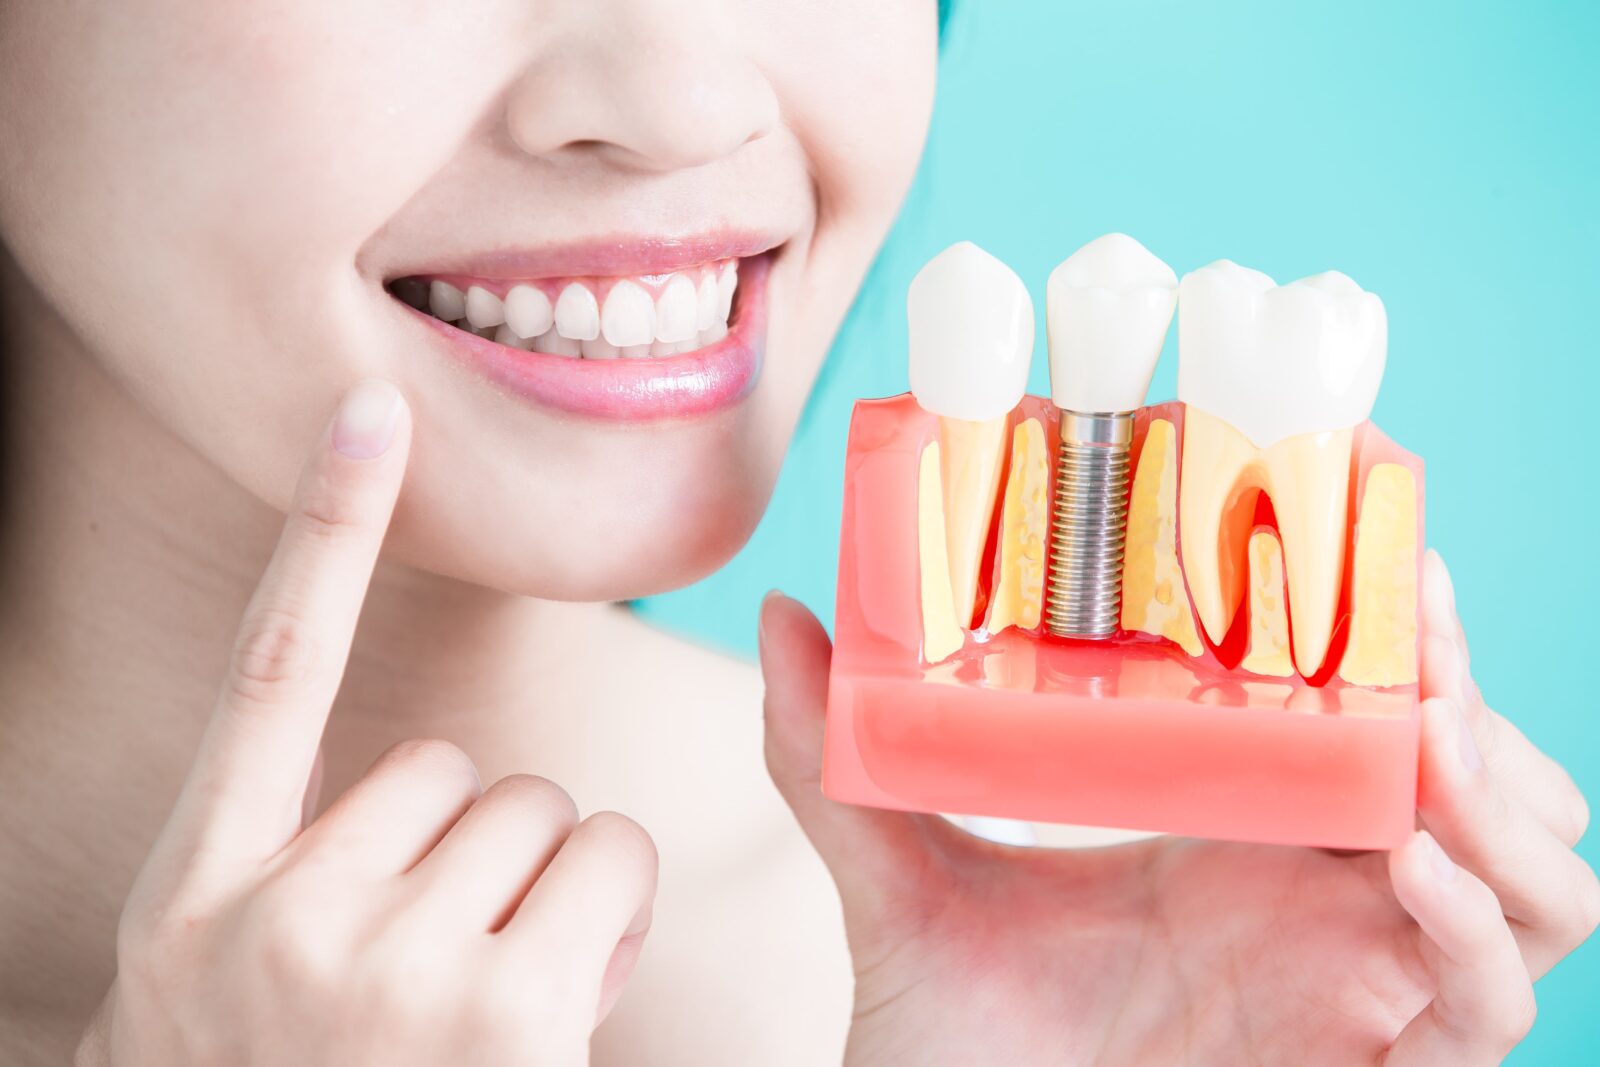 woman smiling and pointing to her teeth while holding a dental implant model